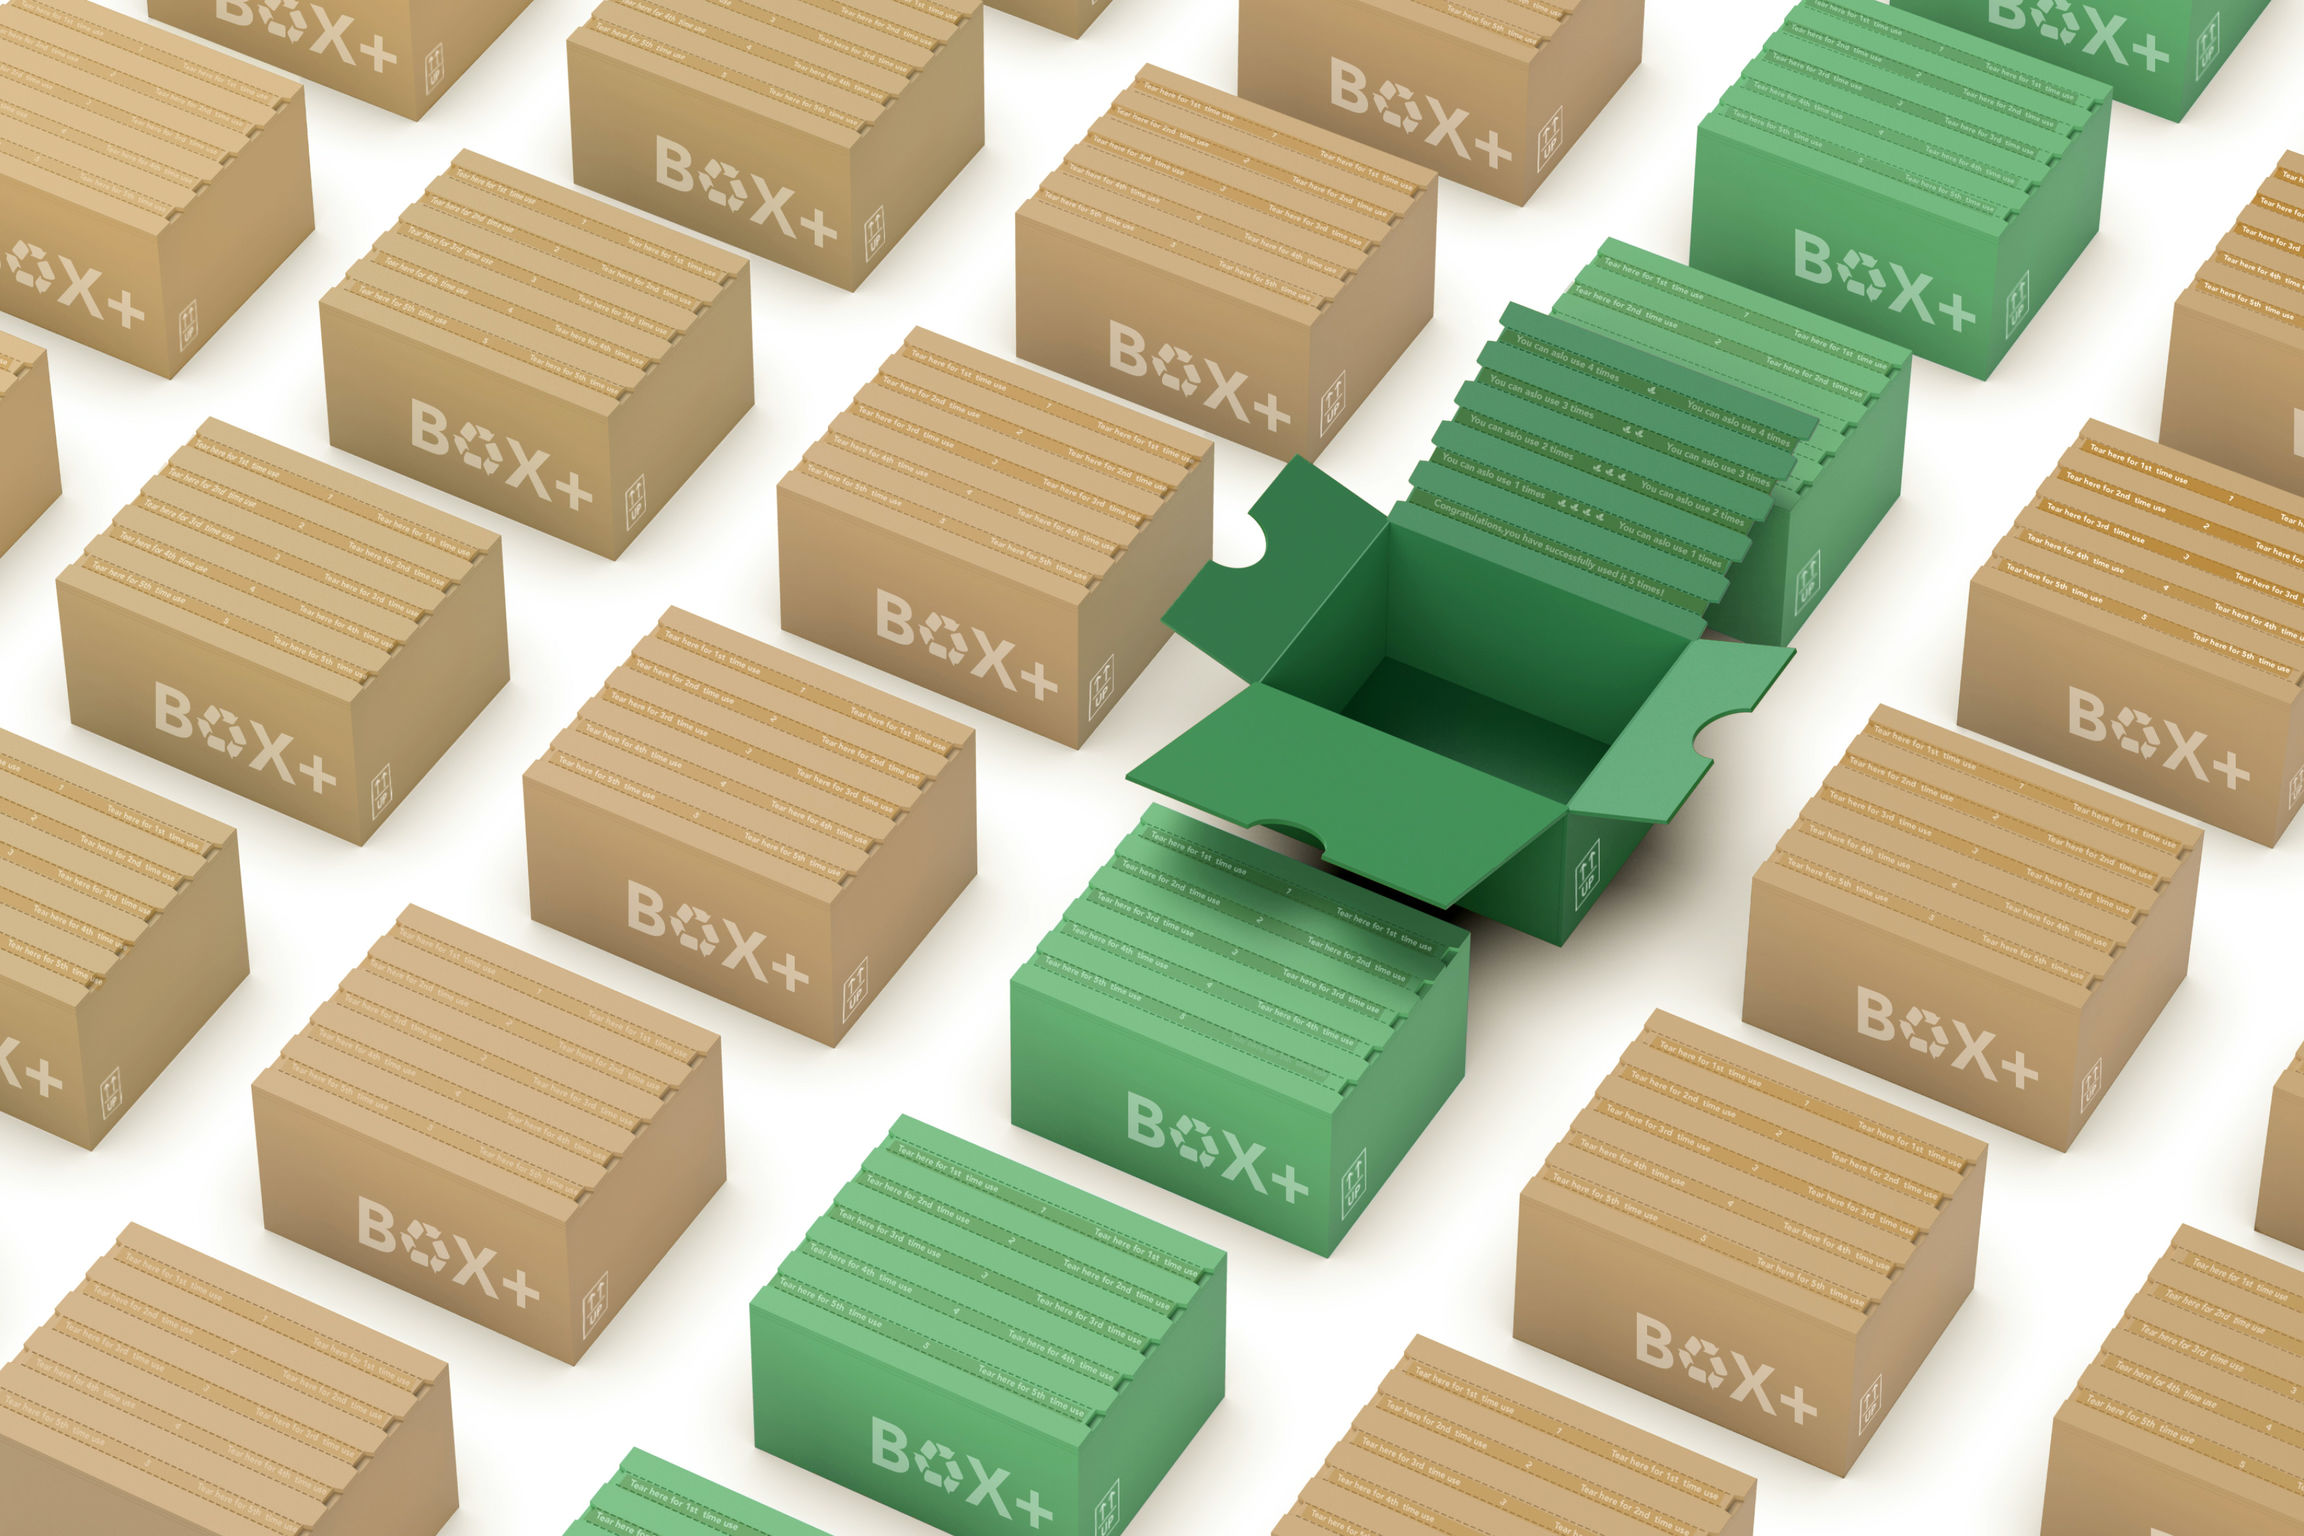 BOX+ recyclable cardboard parcel box and service system